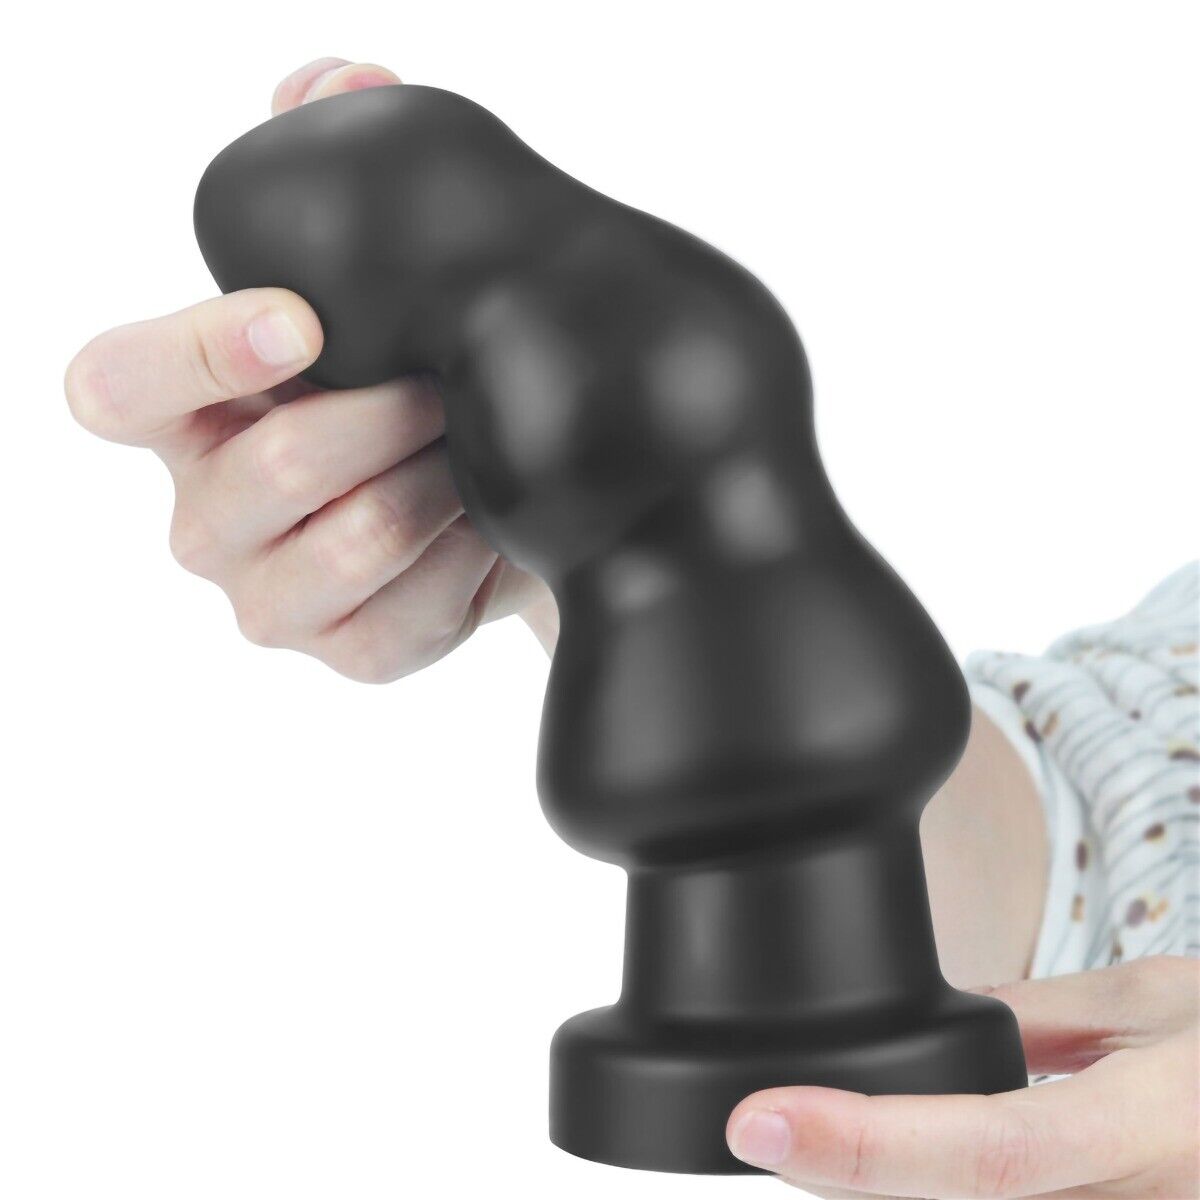 King Sized XL Huge Vibrating Ribbed Anal Butt Plug Dildo Dong Sex Toys